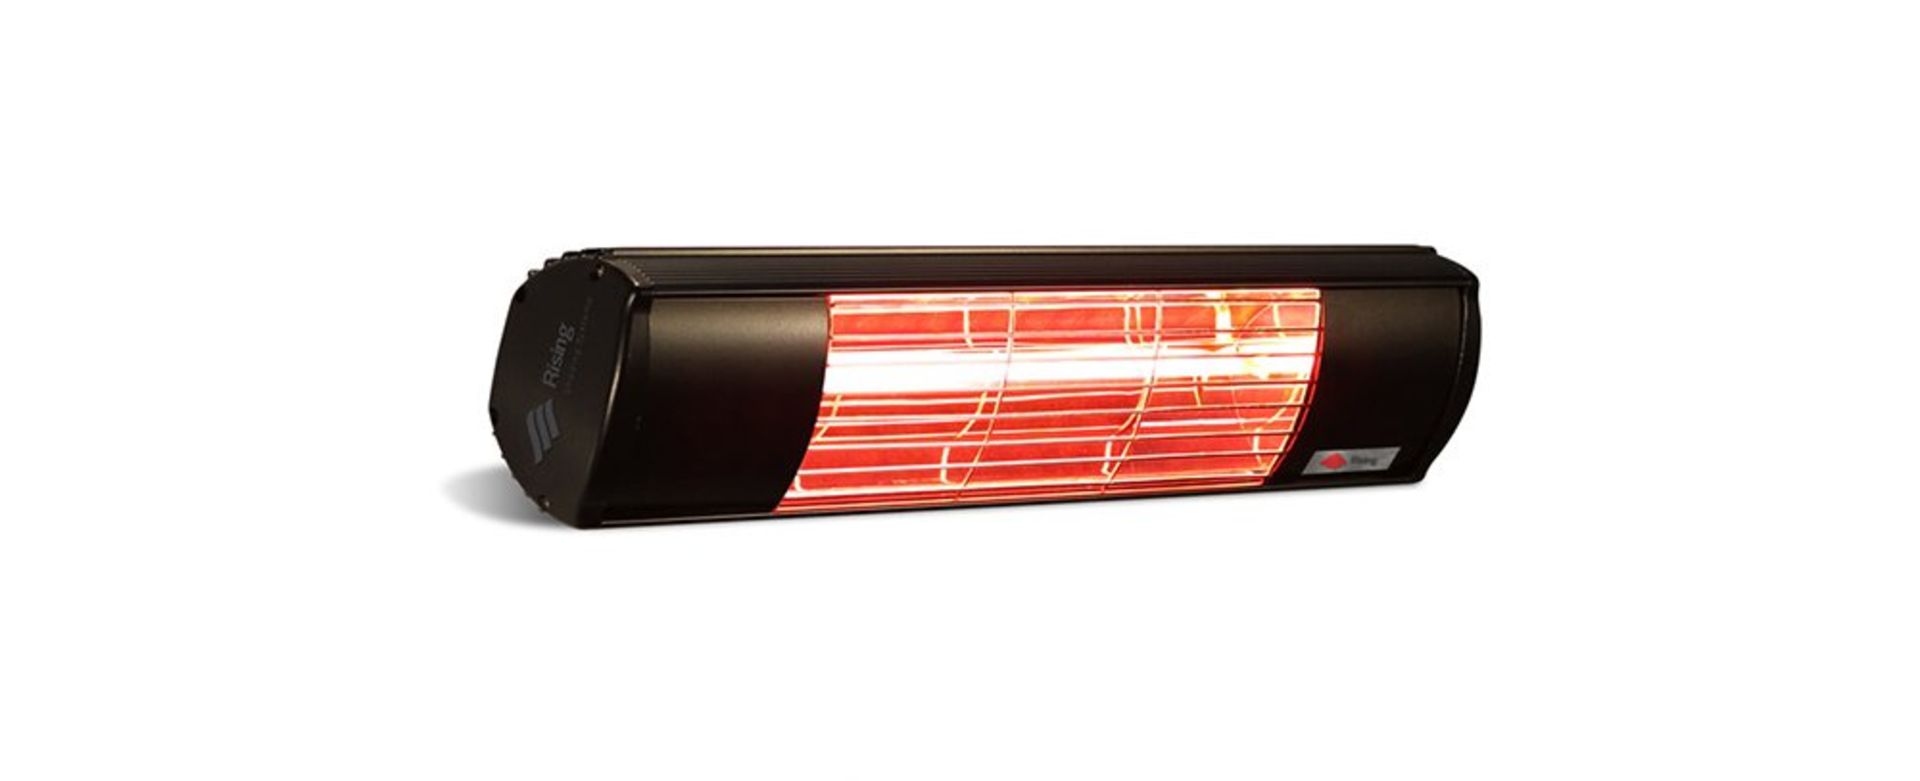 10x GOSS Infrared Commerical heater (2kW) comes with cable hanging wit a tail - to a 13amp